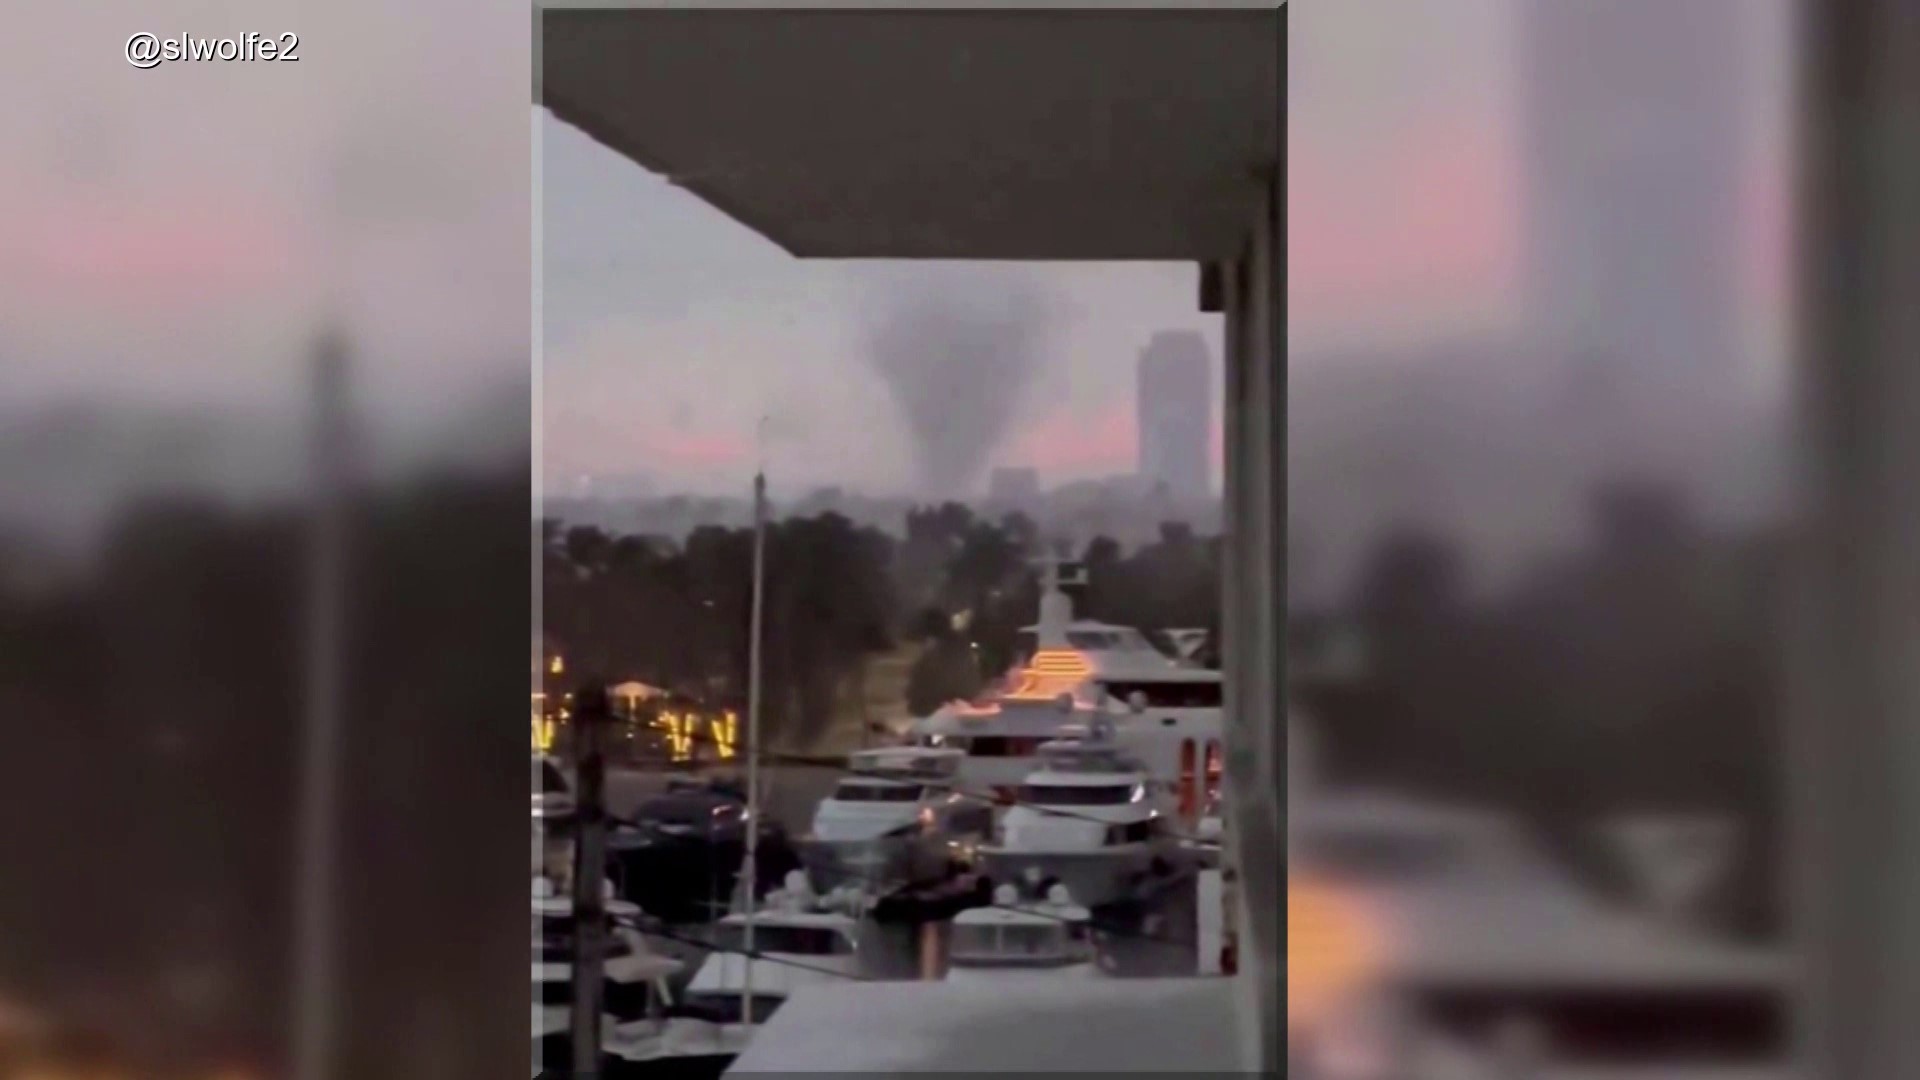 An apparent tornado moved near the downtown Fort Lauderdale area late Saturday afternoon.